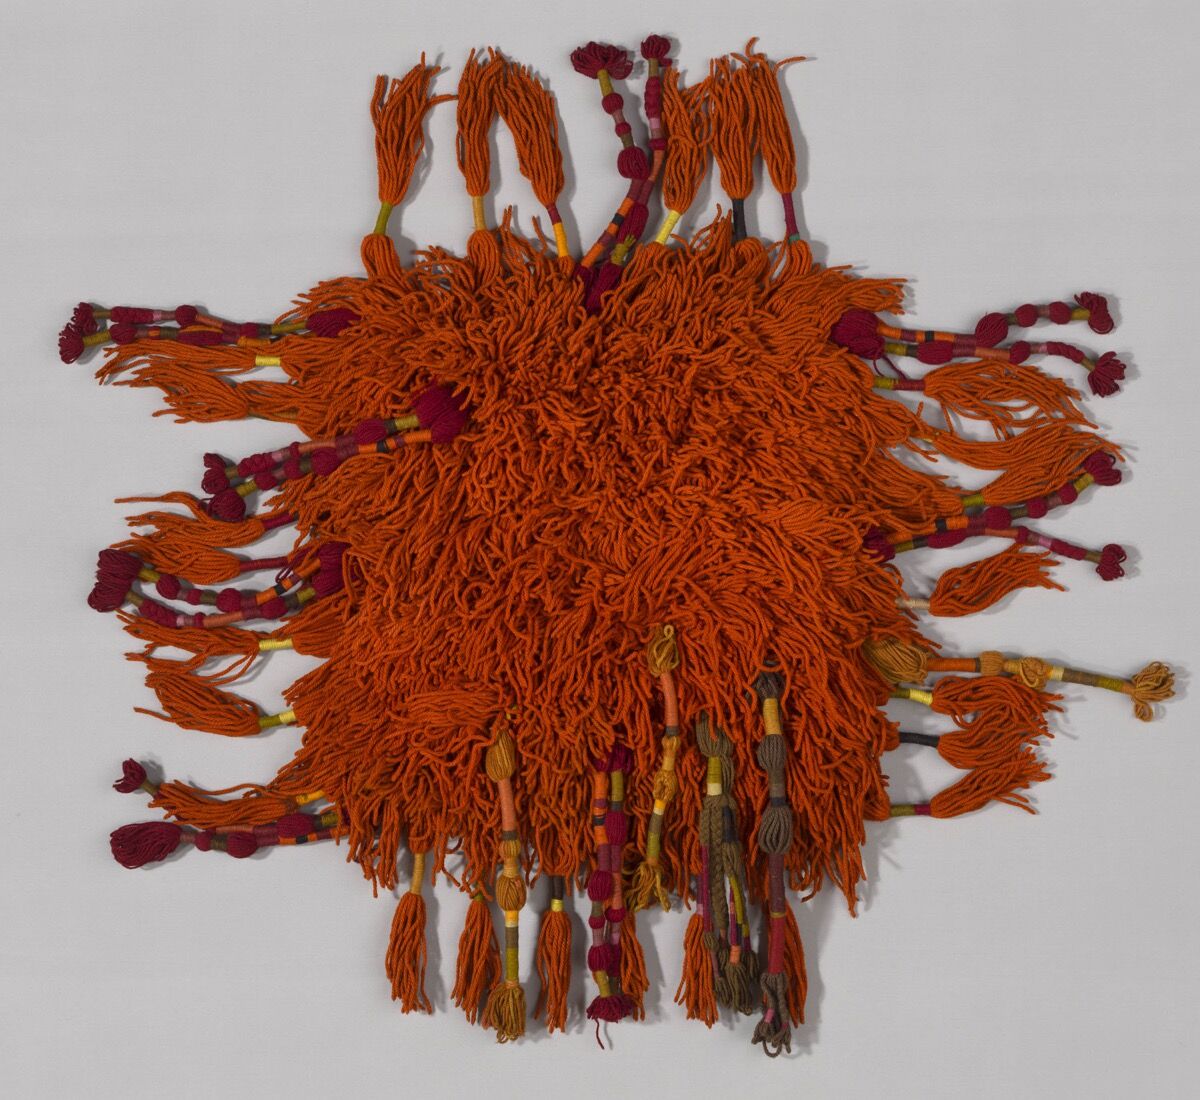 Sheila Hicks, Produced by V’SOSKE, Rug, ca. 1965. Courtesy of the Art Institute of Chicago.